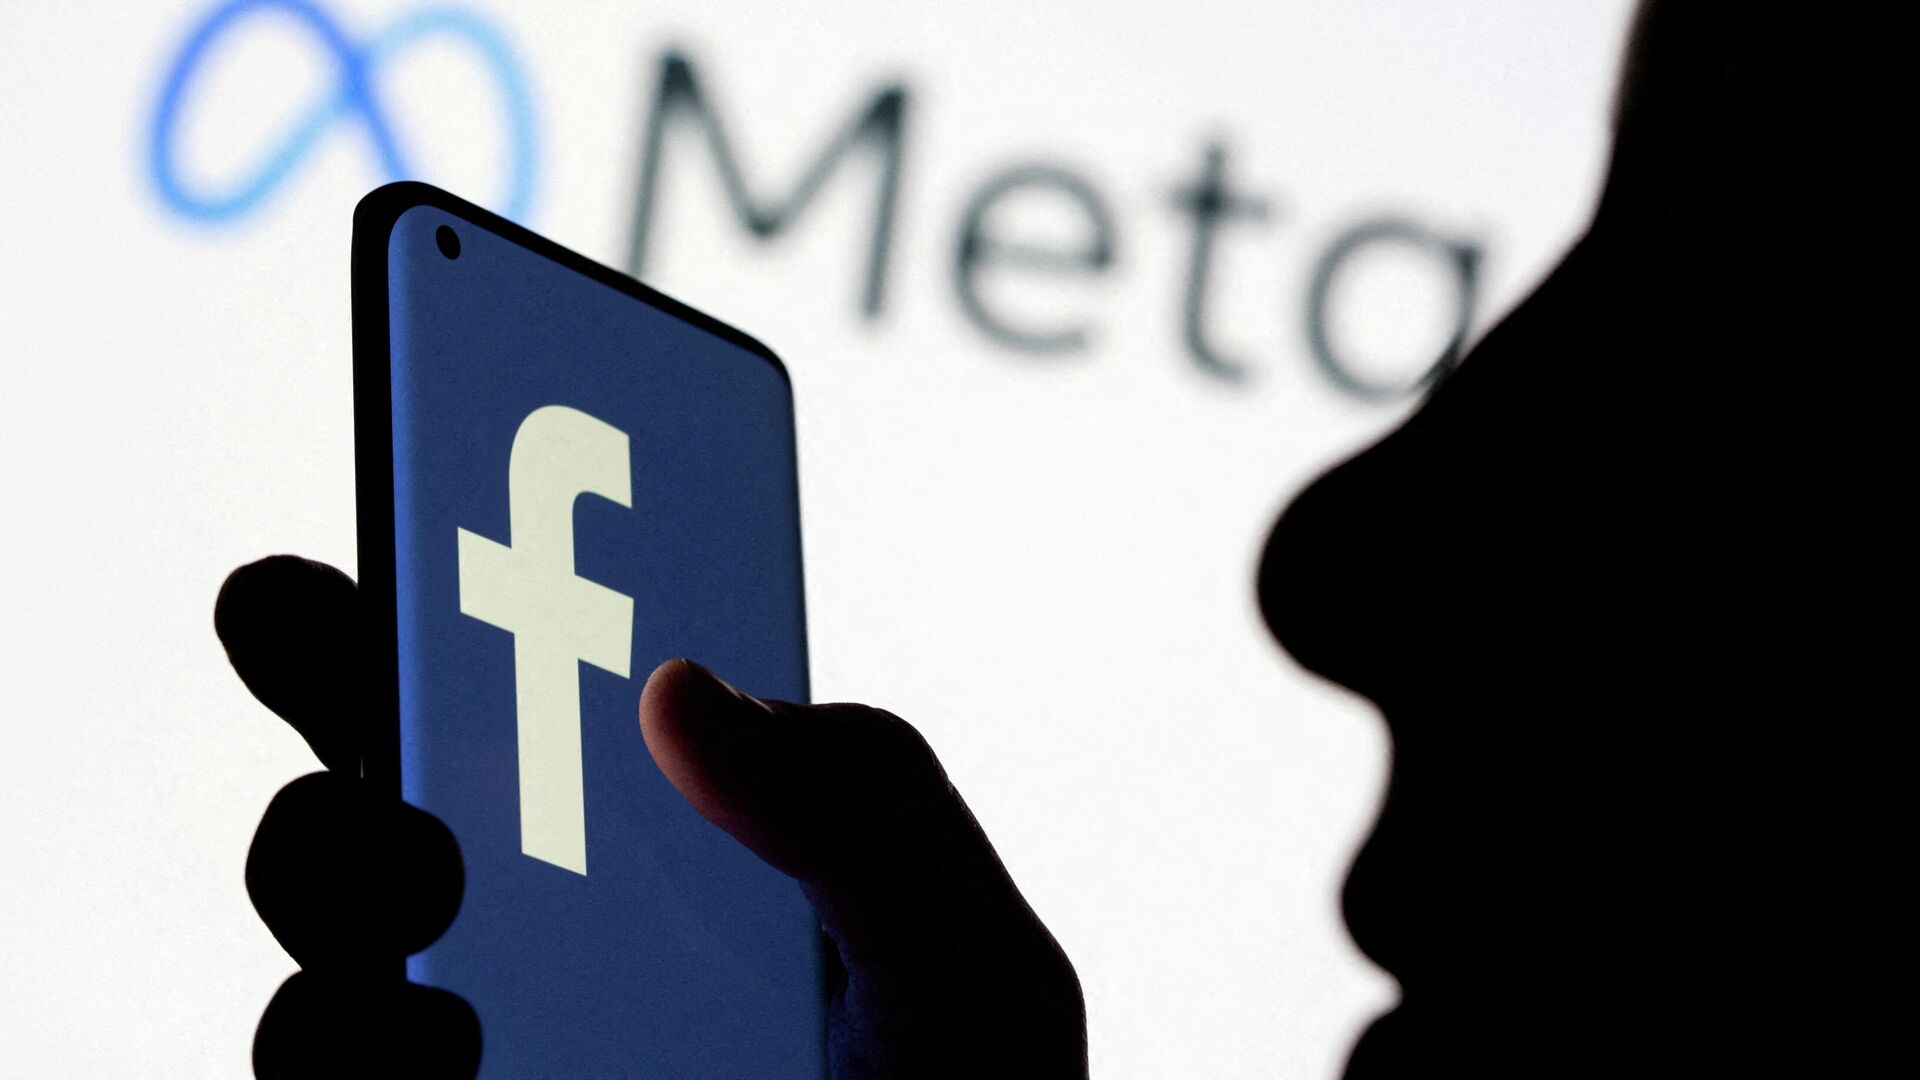 A woman holds smartphone with Facebook logo in front of a displayed Facebook's new rebrand logo Meta in this illustration picture taken October 28, 2021 - Sputnik International, 1920, 16.01.2022